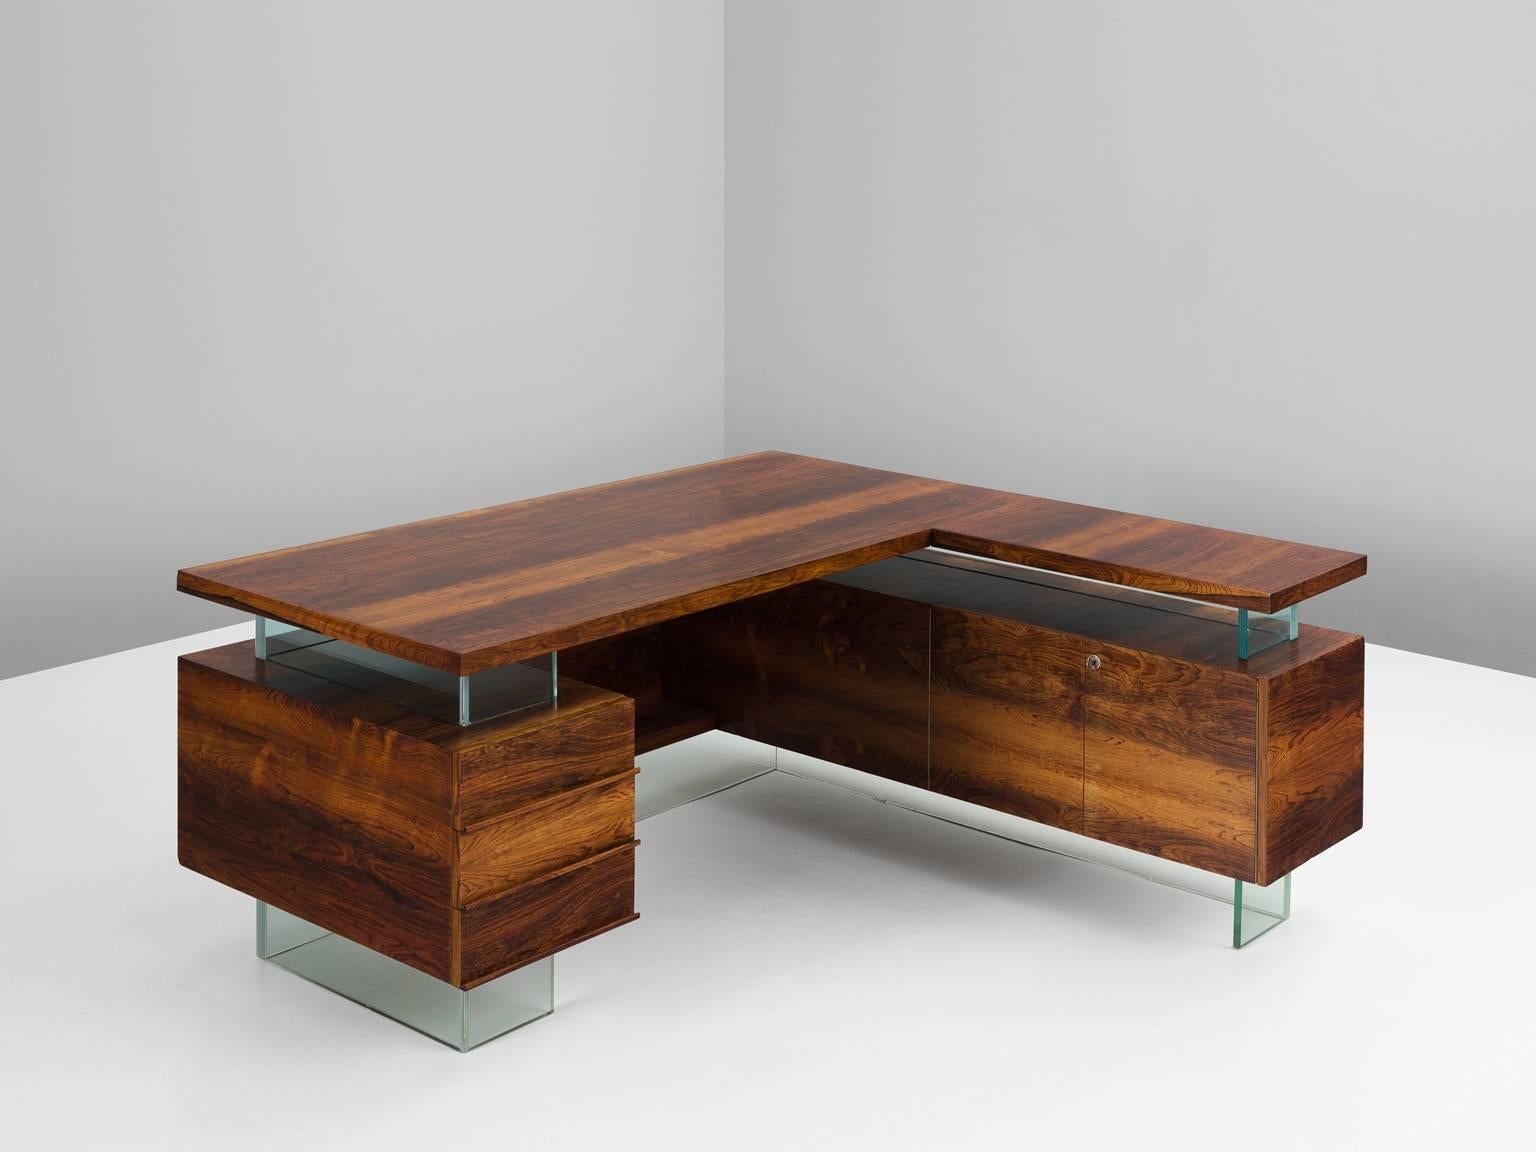 Desk in rosewood and glass, France, 1960s.

Large desk and return in Rio rosewood and glass. This desk originates from France. The wonderful design shows resemblance to the works of French designers like Rene Jean Caillette, Pierre Guariche